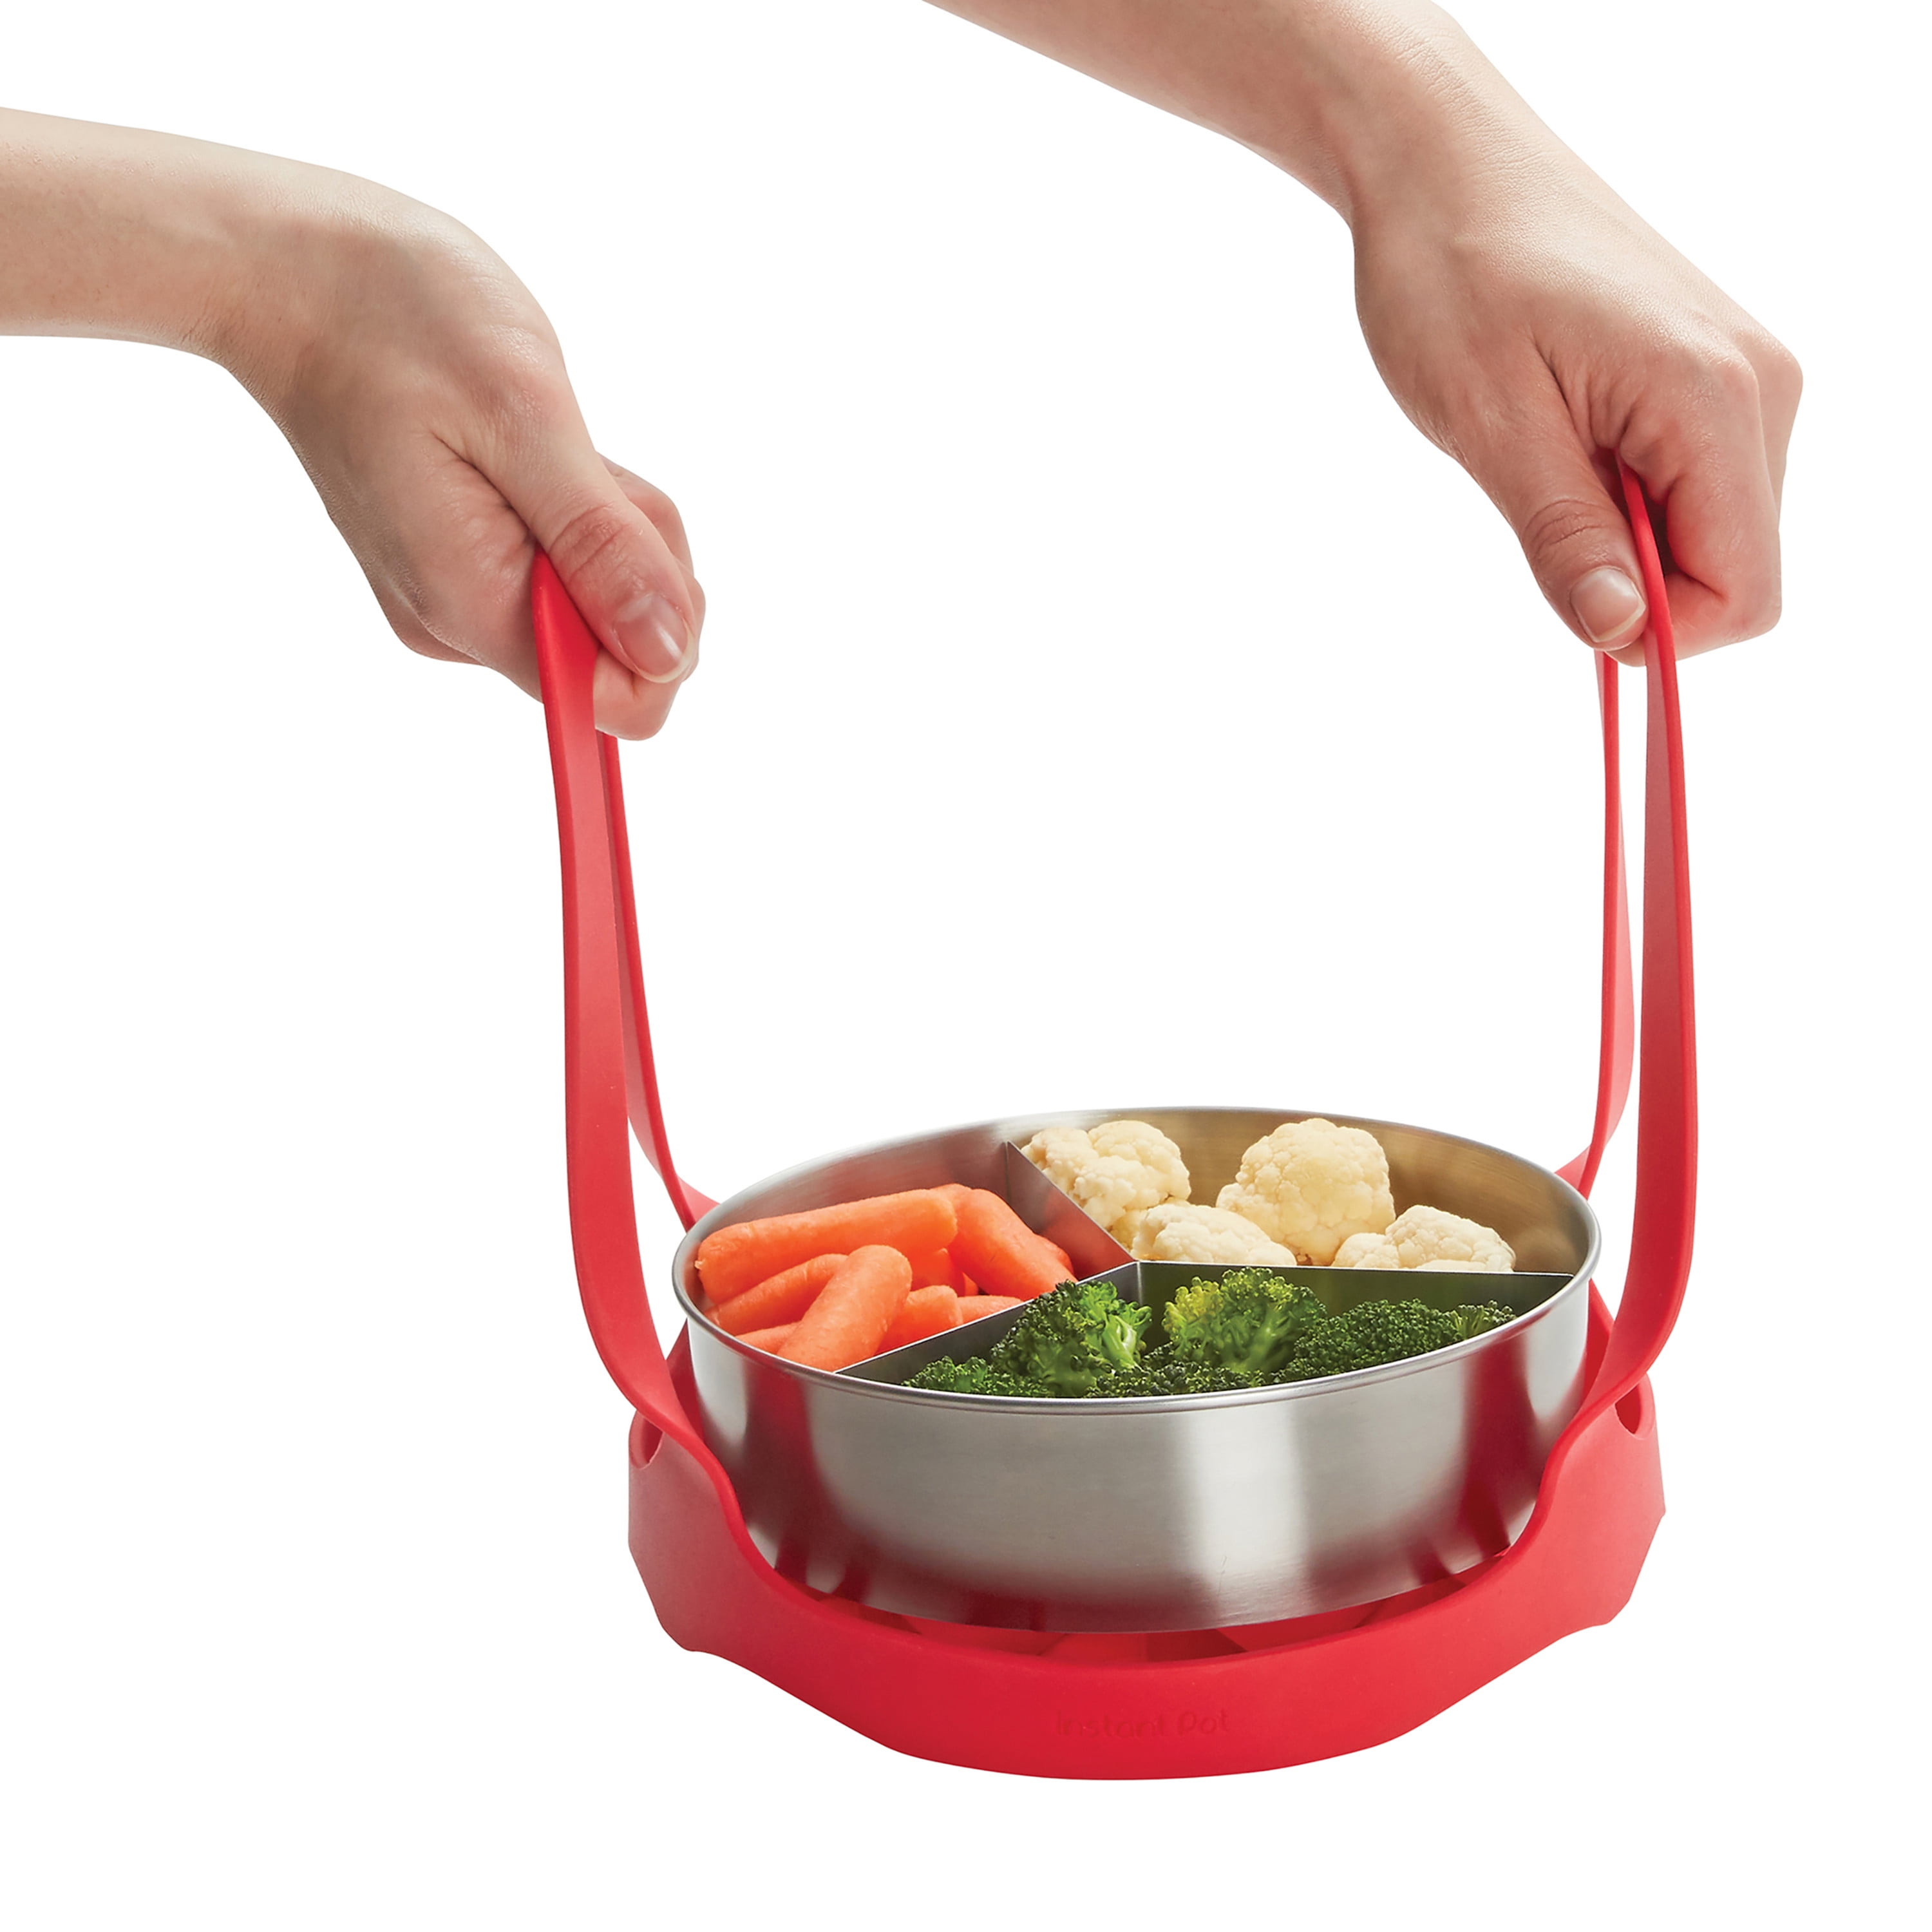 Silicone Bakeware Sling for Pressure Cookers